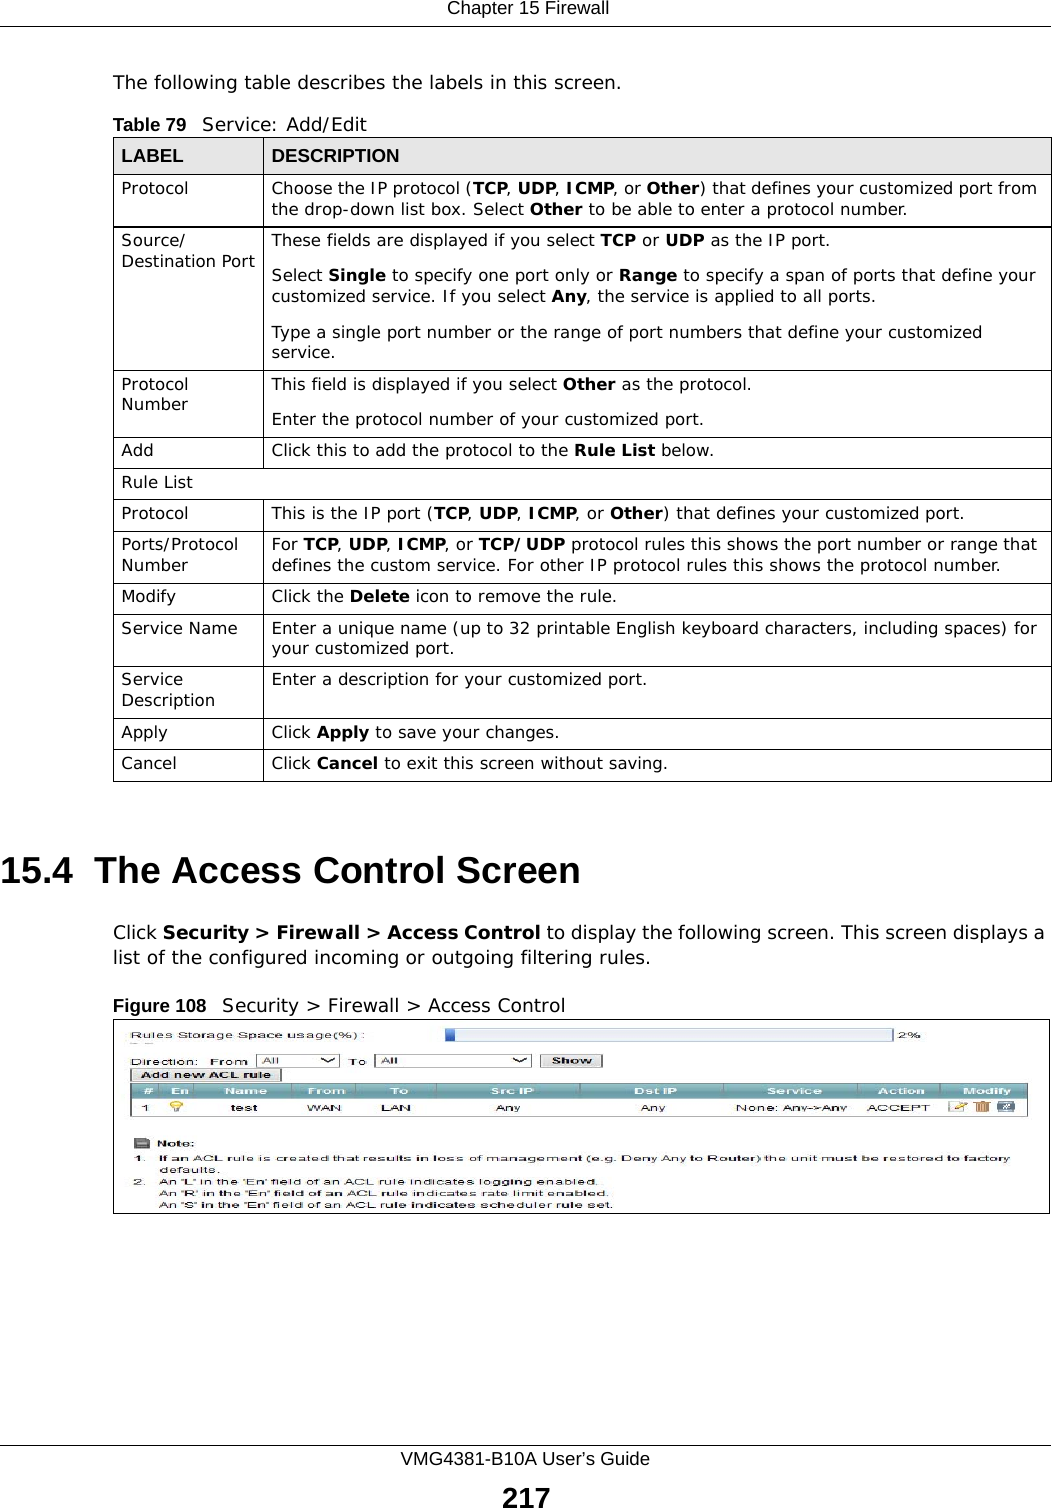  Chapter 15 FirewallVMG4381-B10A User’s Guide217The following table describes the labels in this screen.15.4  The Access Control ScreenClick Security &gt; Firewall &gt; Access Control to display the following screen. This screen displays a list of the configured incoming or outgoing filtering rules. Figure 108   Security &gt; Firewall &gt; Access Control Table 79   Service: Add/EditLABEL DESCRIPTIONProtocol Choose the IP protocol (TCP, UDP, ICMP, or Other) that defines your customized port from the drop-down list box. Select Other to be able to enter a protocol number.Source/Destination Port These fields are displayed if you select TCP or UDP as the IP port. Select Single to specify one port only or Range to specify a span of ports that define your customized service. If you select Any, the service is applied to all ports.Type a single port number or the range of port numbers that define your customized service.Protocol Number This field is displayed if you select Other as the protocol.Enter the protocol number of your customized port. Add Click this to add the protocol to the Rule List below.Rule ListProtocol This is the IP port (TCP, UDP, ICMP, or Other) that defines your customized port.Ports/Protocol Number For TCP, UDP, ICMP, or TCP/UDP protocol rules this shows the port number or range that defines the custom service. For other IP protocol rules this shows the protocol number. Modify Click the Delete icon to remove the rule.Service Name Enter a unique name (up to 32 printable English keyboard characters, including spaces) for your customized port. Service Description Enter a description for your customized port.Apply Click Apply to save your changes.Cancel Click Cancel to exit this screen without saving.